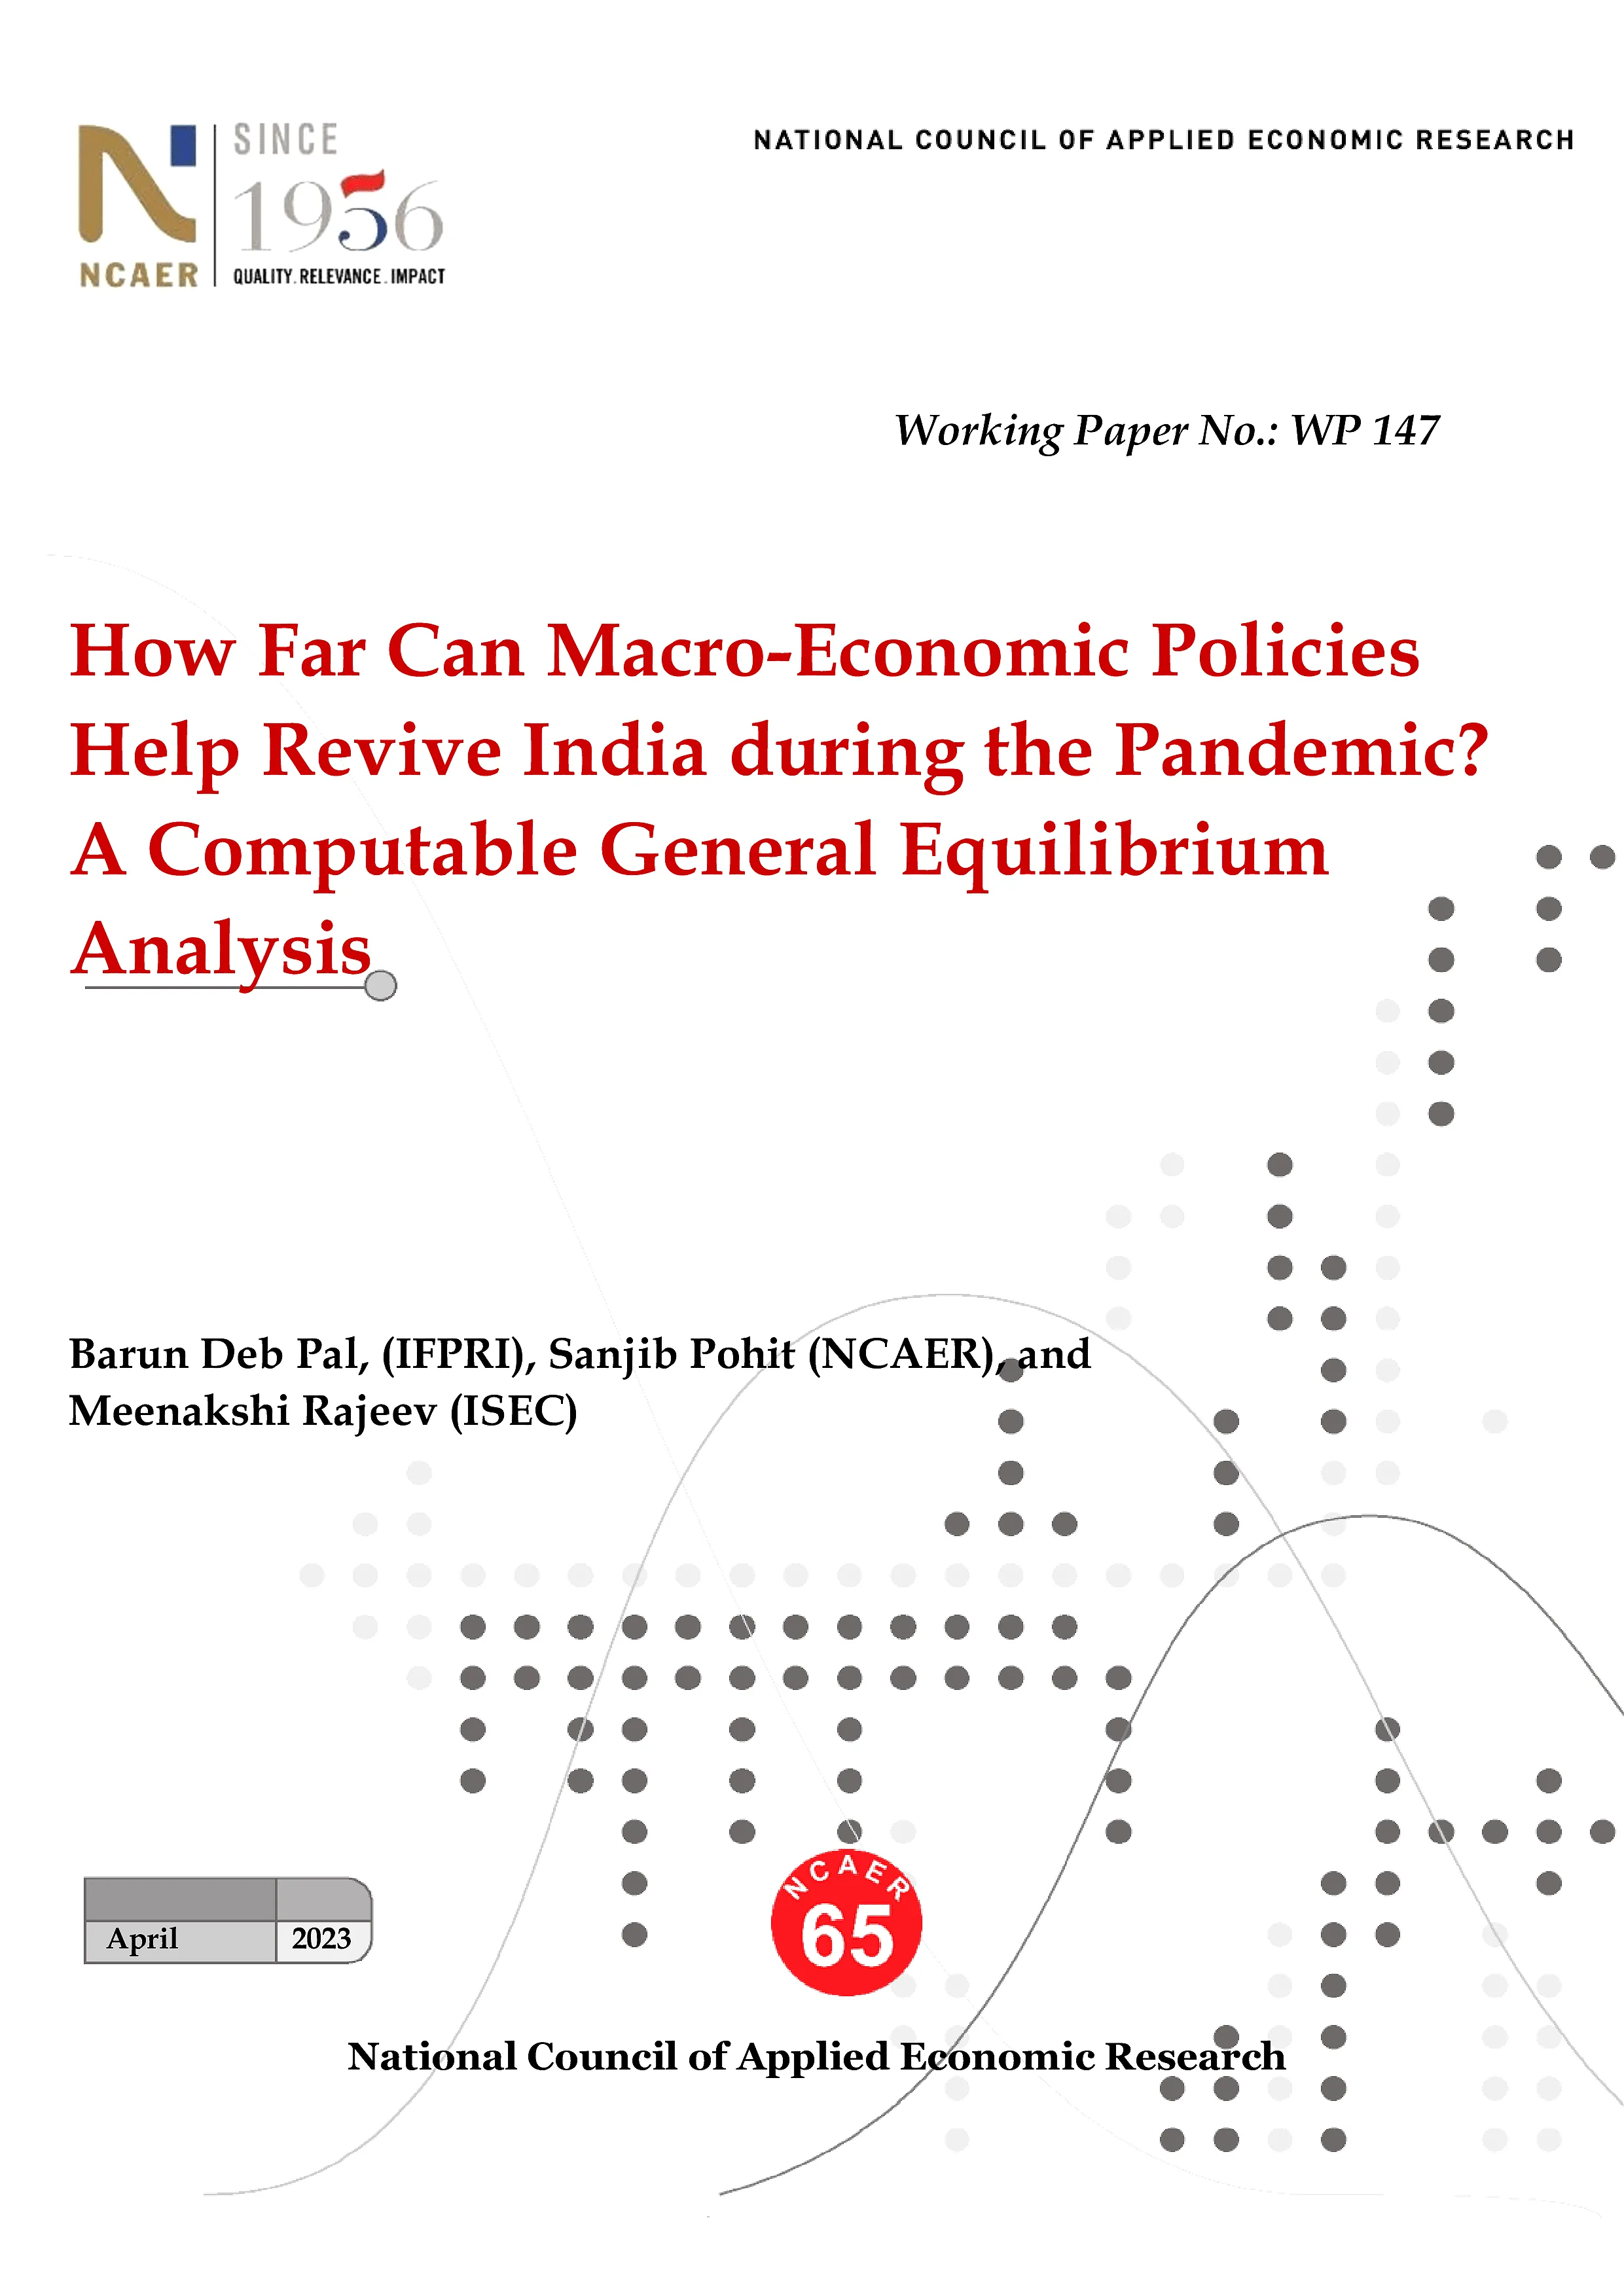 How Far Can Macro-Economic Policies Help Revive India during the Pandemic? A Computable General Equilibrium Analysis